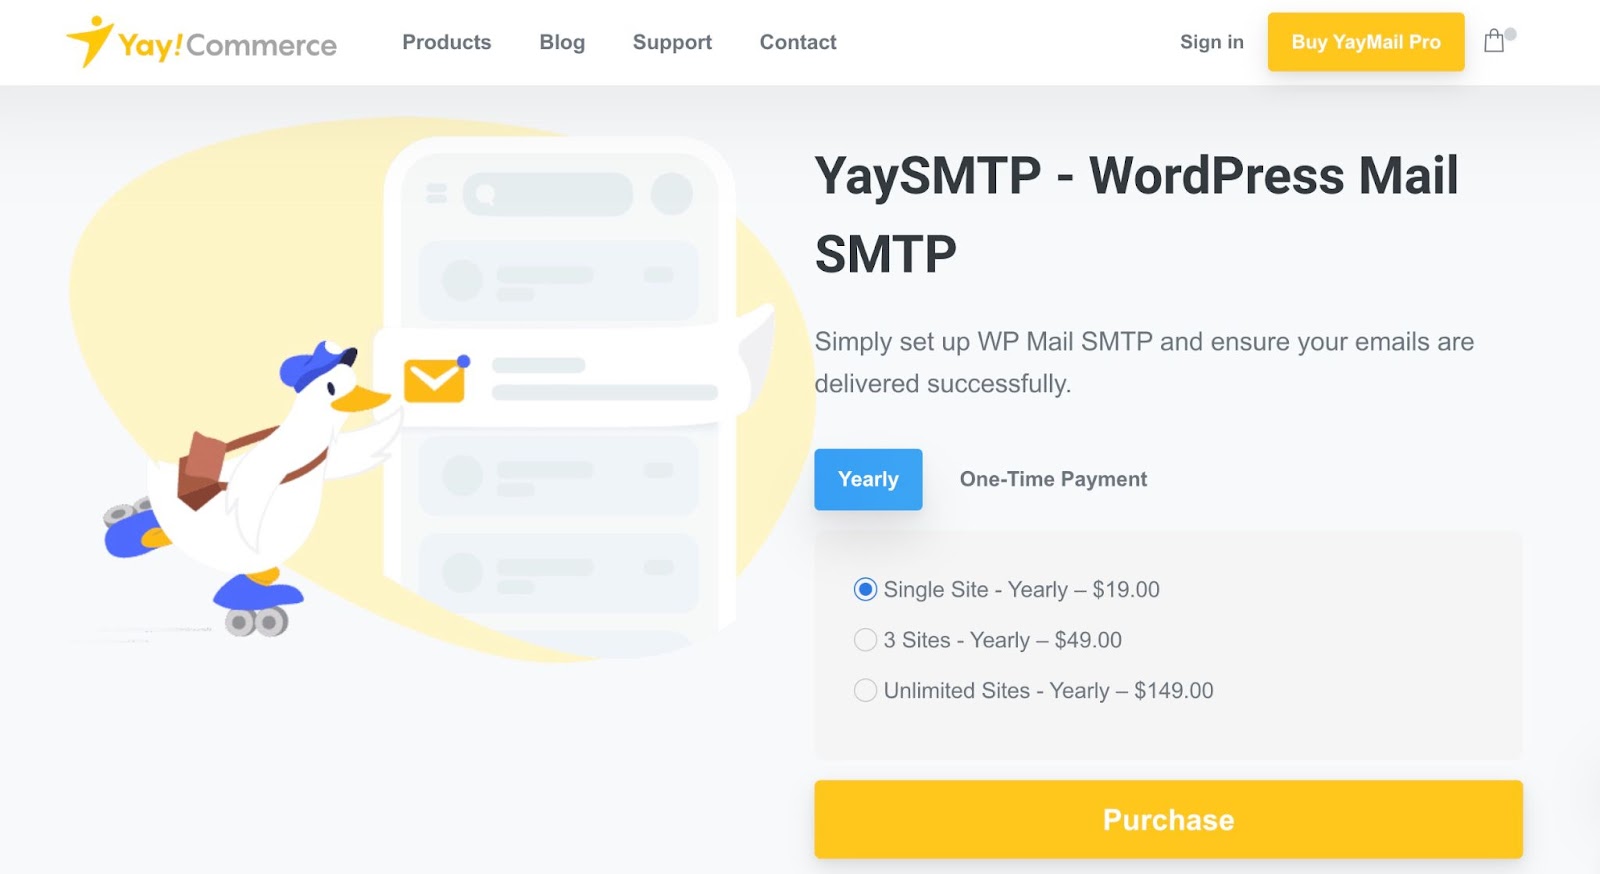 yaysmtp – overview and key features